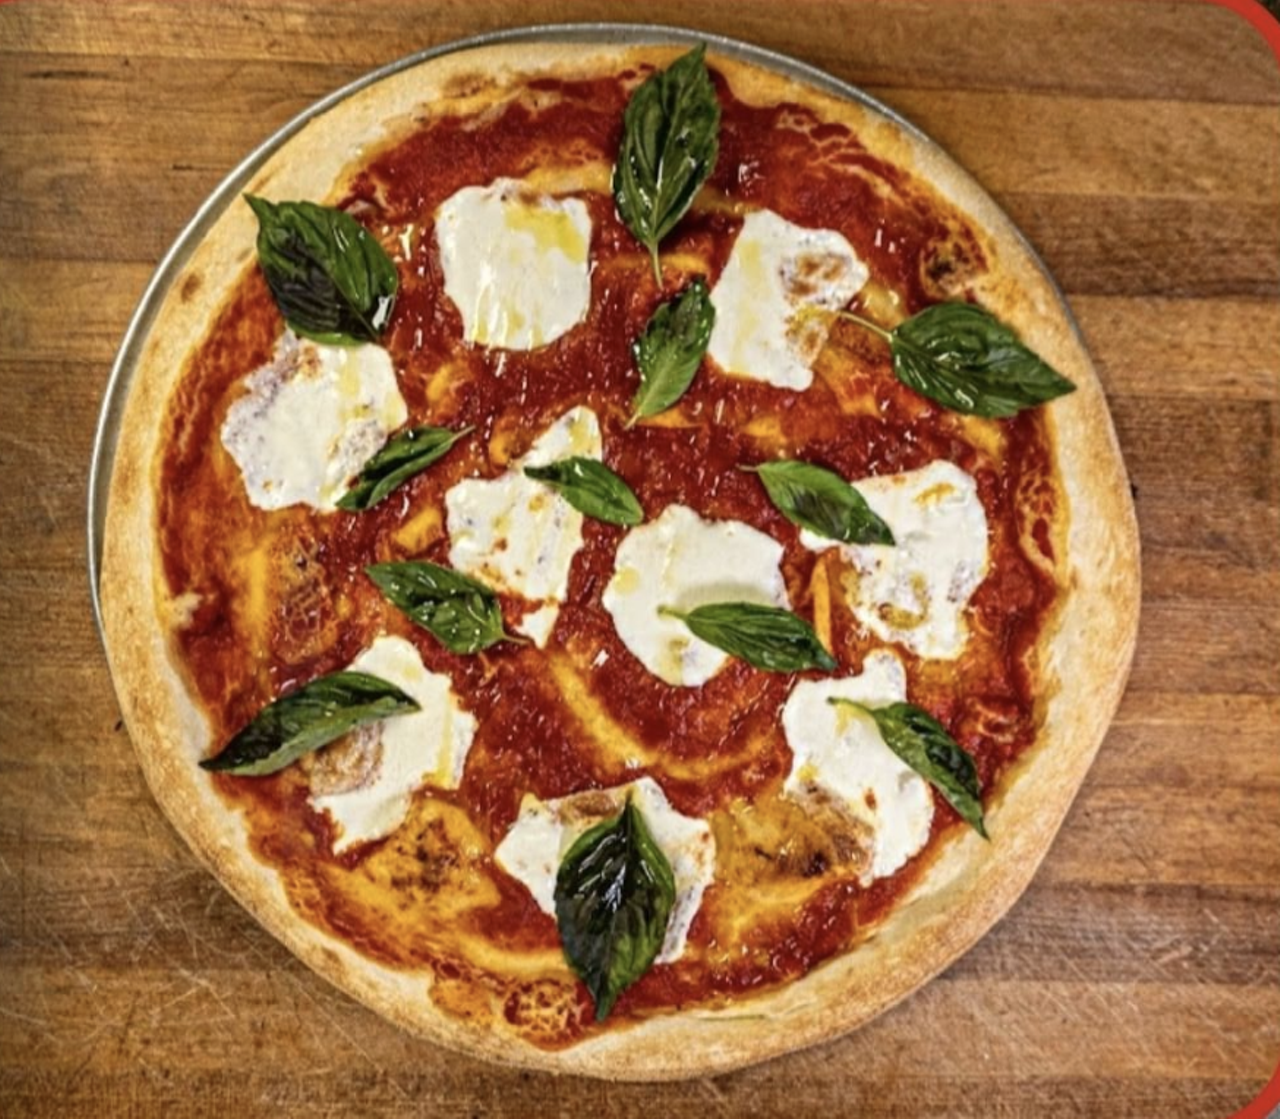 Sofia’s Pizzeria
903 E. Bitters Road, (210) 960-5700, sofiaspizzeriatx.com
This thin-crust pizza haven is known for its New York-style brick oven pies along with wings and pasta. Their new Stone Oak location is the third Sofia’s Pizzeria in San Antonio. 
Photo via Instagram / sofiaspizzeriatx